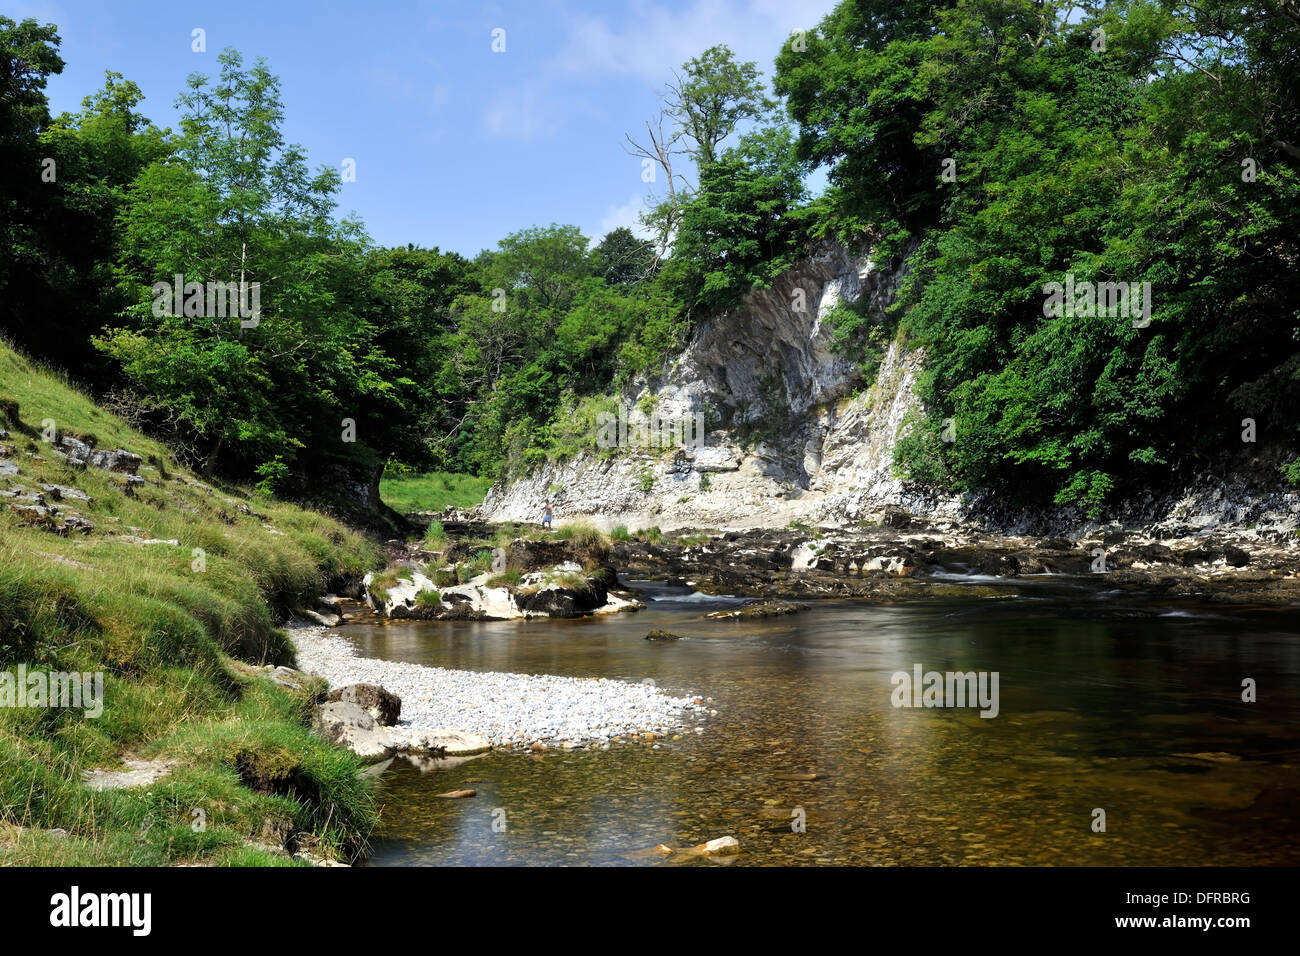 A carboniferous limestone cliff (Loup Scar) on the River Wharfe, Yorkshire Dales National Park, England Stock Photo